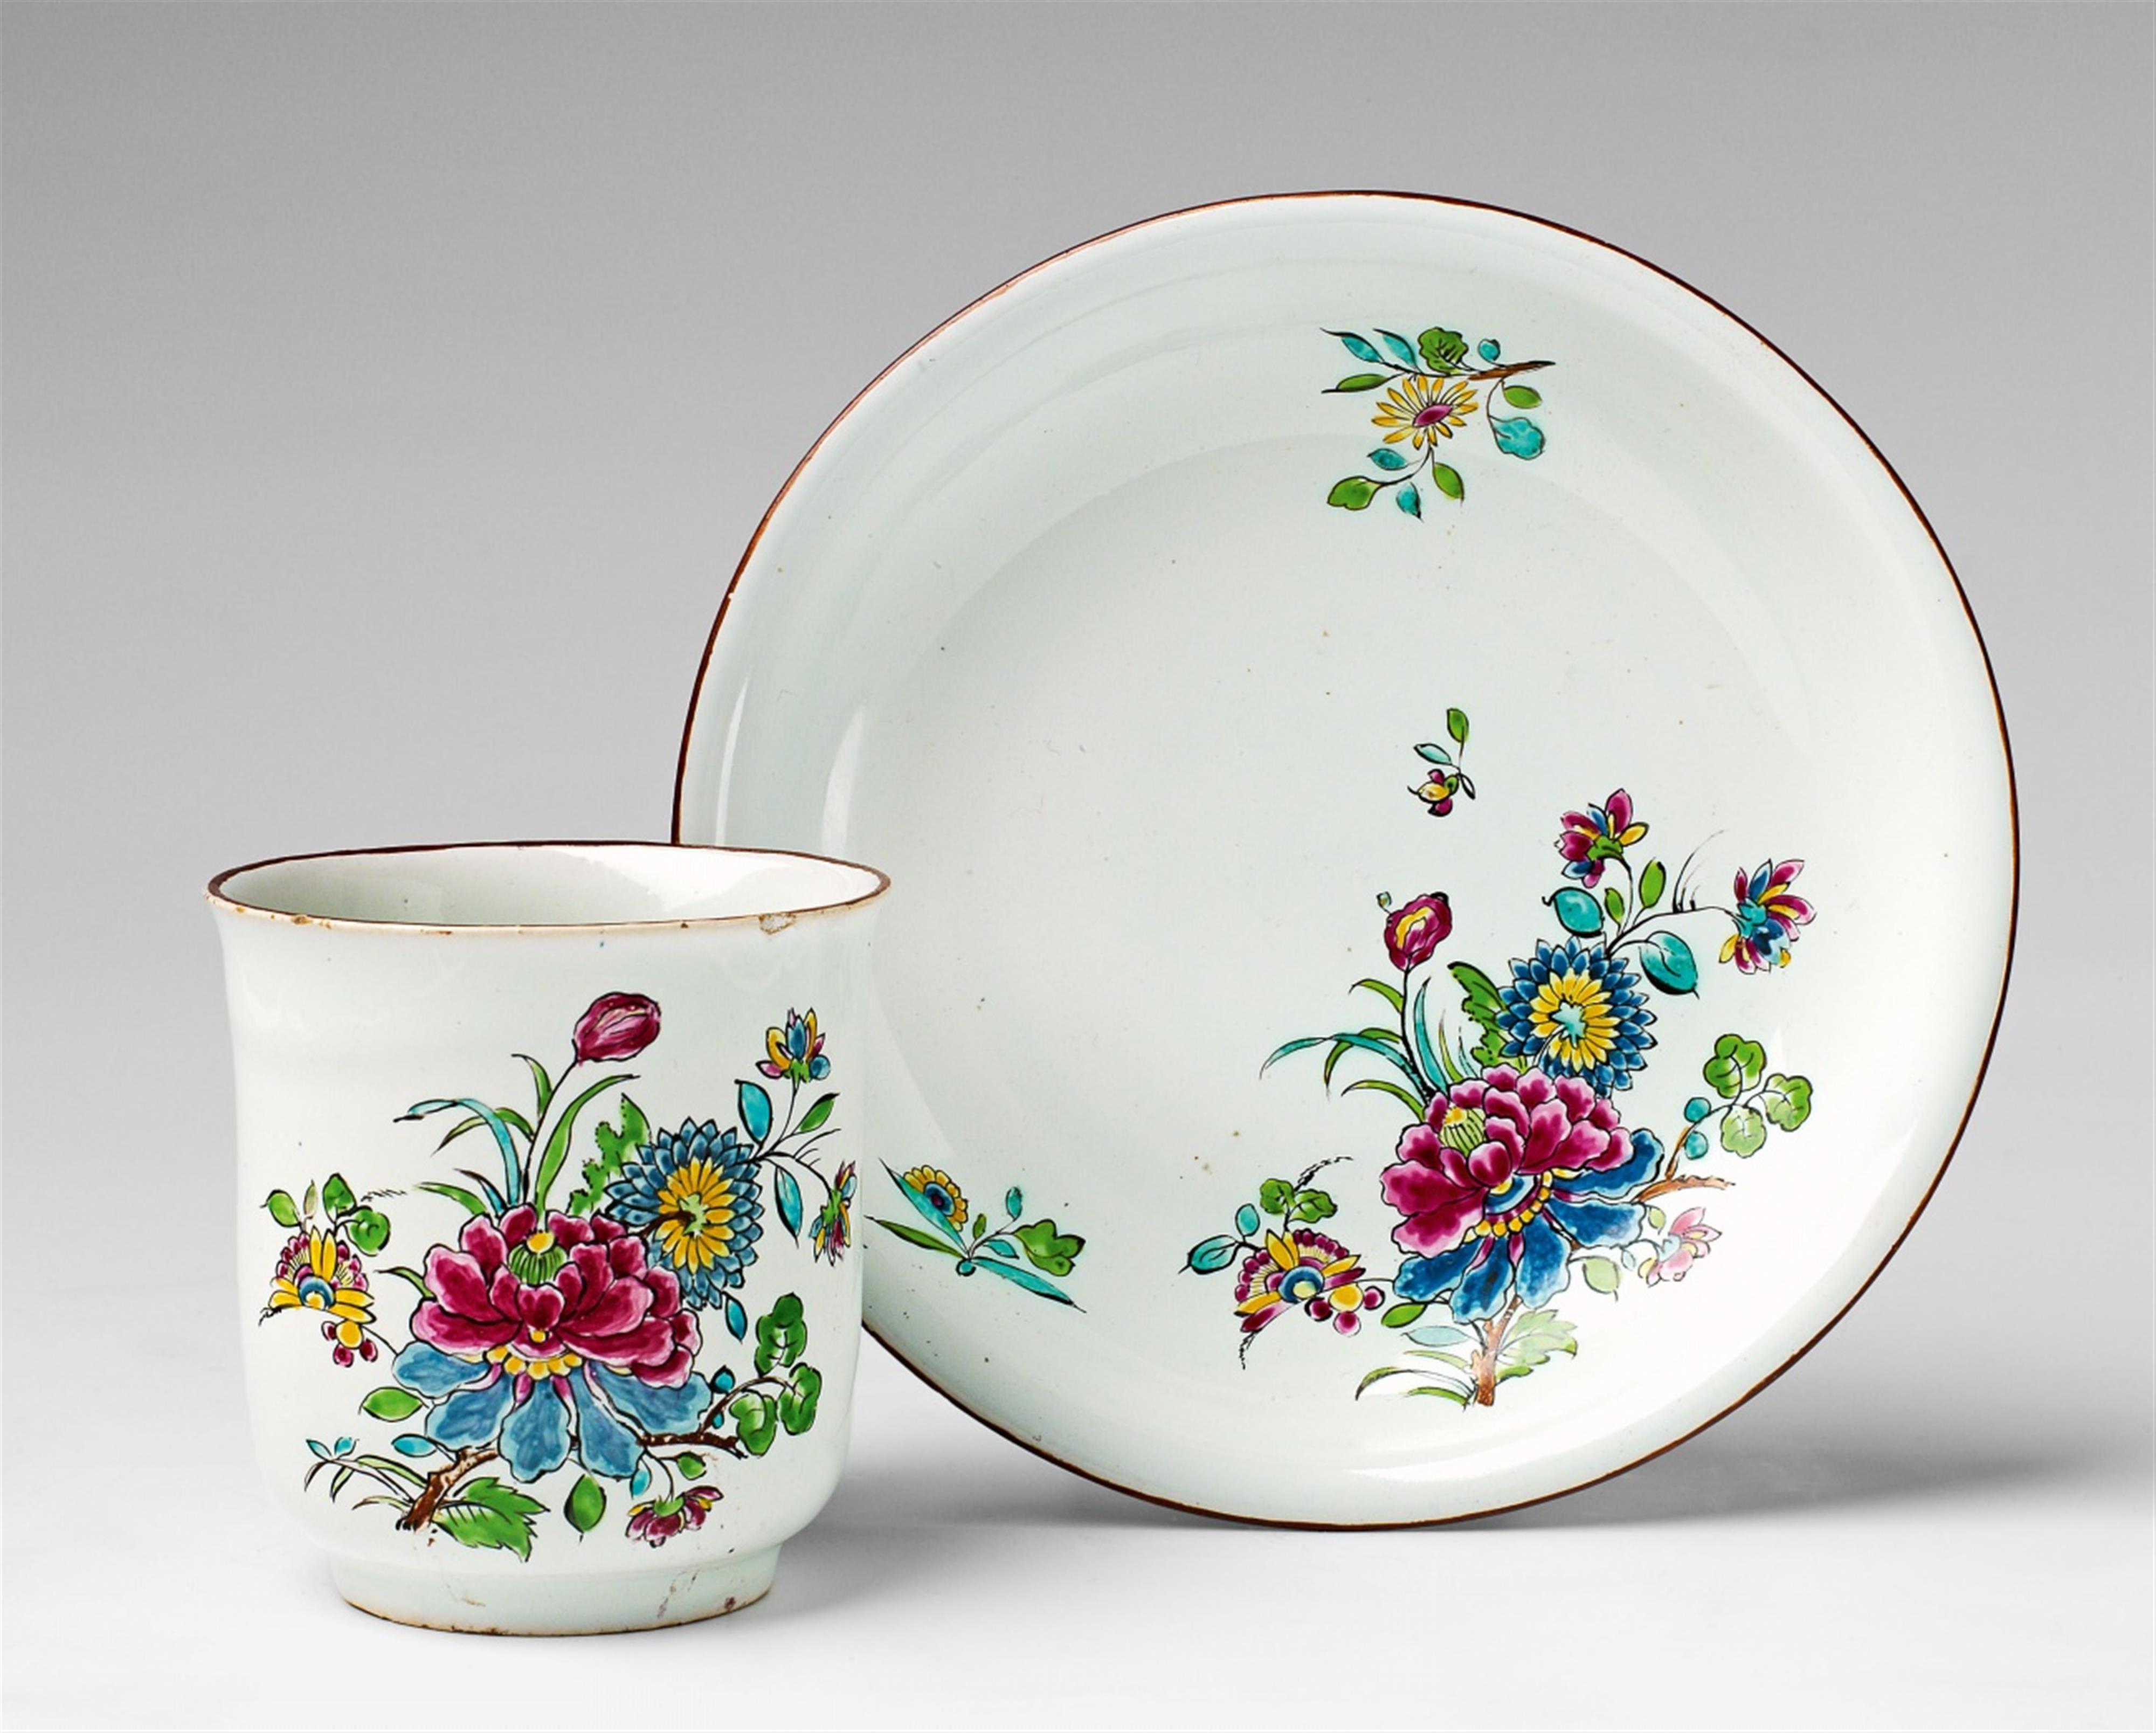 A rare Höchst faience cup and saucer with "indianische blumen" decor - image-1